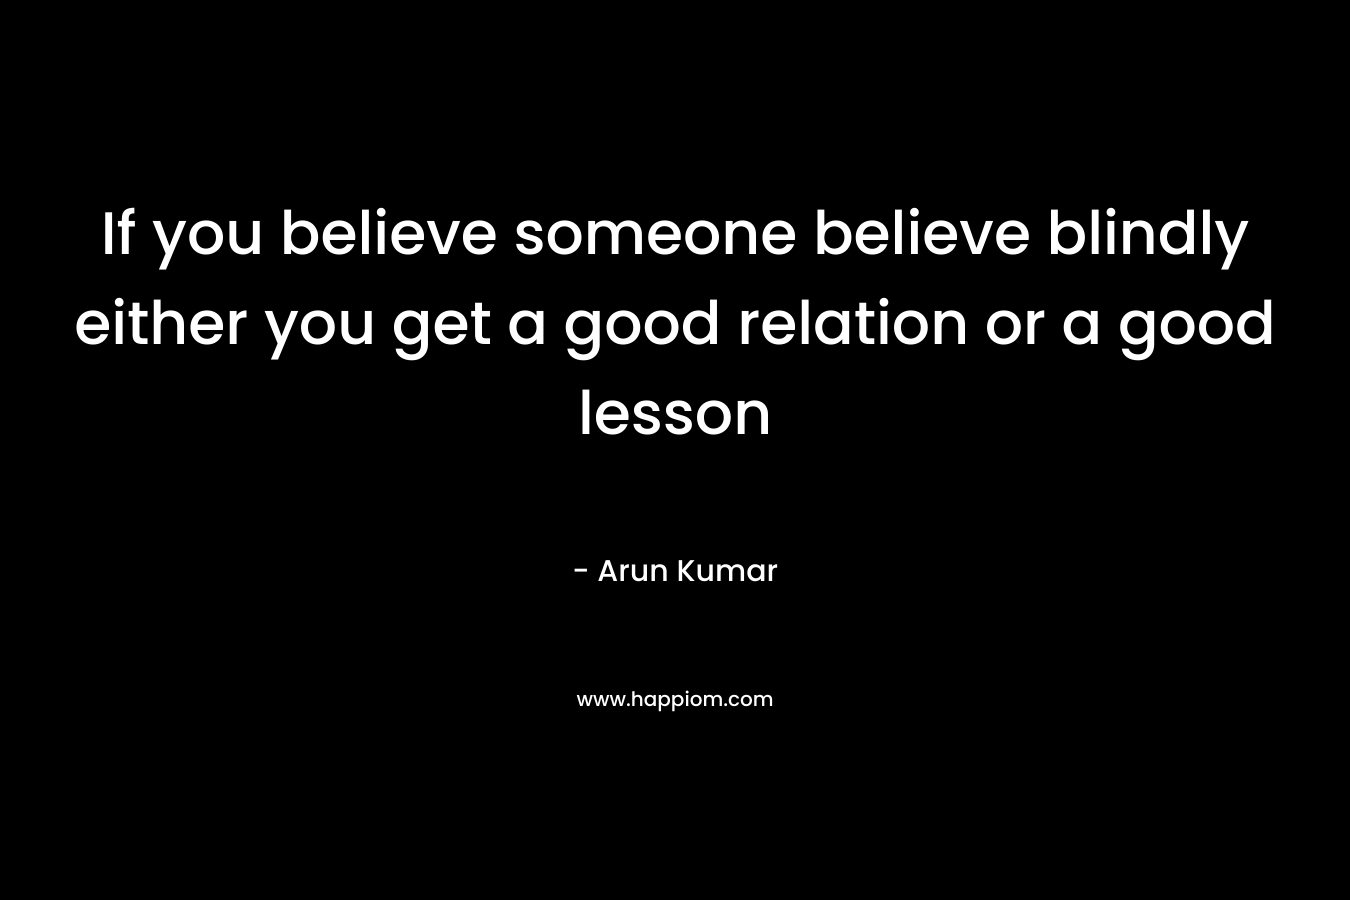 If you believe someone believe blindly either you get a good relation or a good lesson